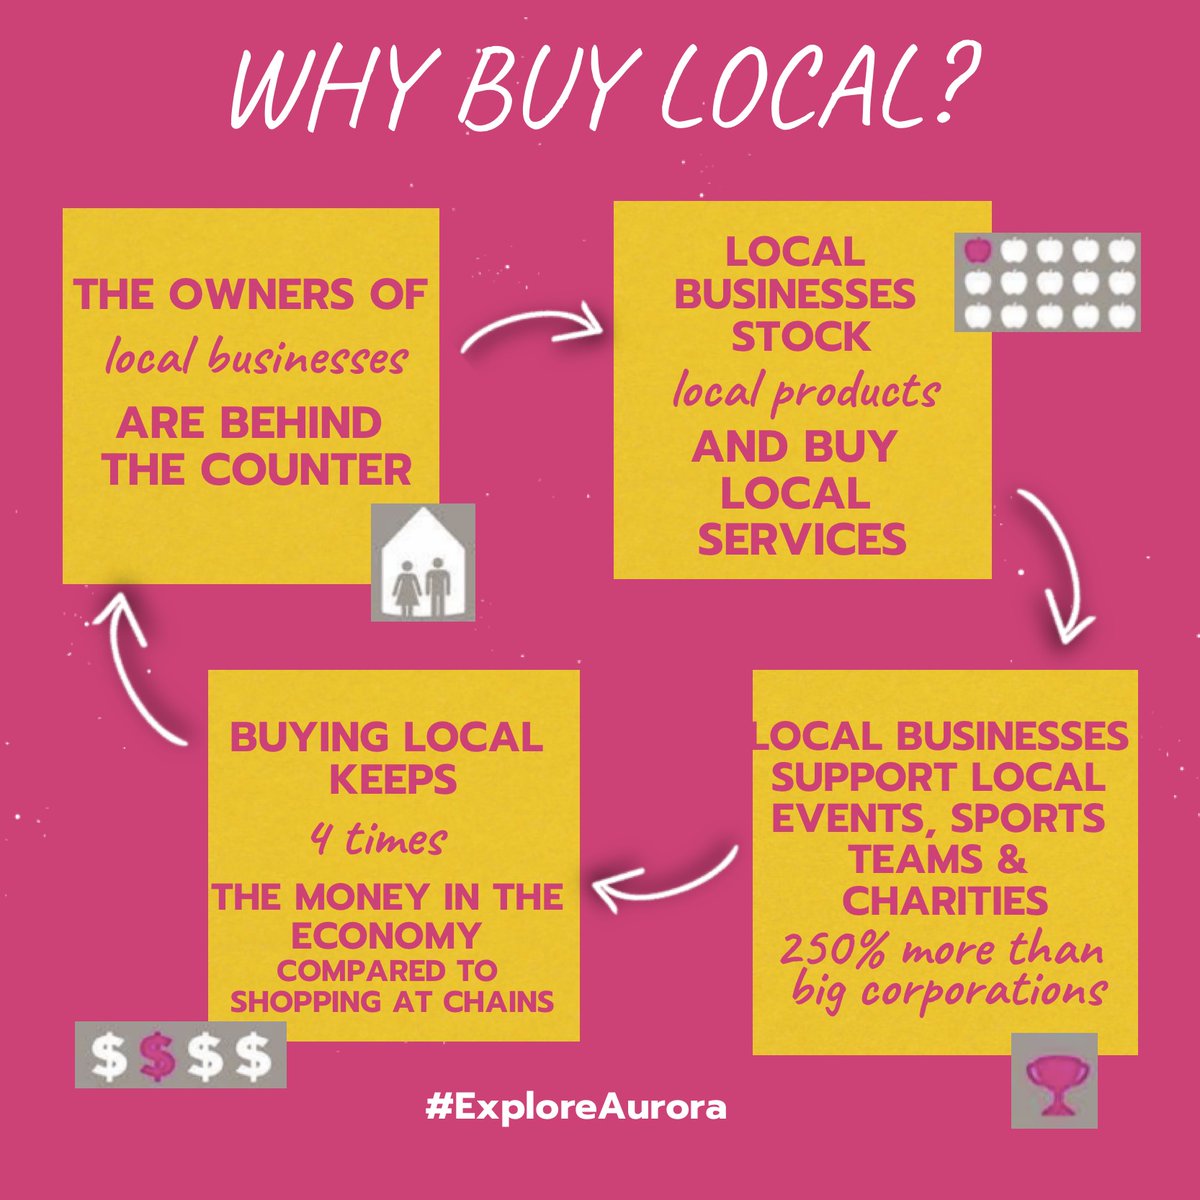 Happy #tiptuesday! We love our local businesses! 💝

How do you #supportlocal in Aurora? Has a local business ever supported your event or team? Let us know! ✨ 

#exploreAurora #AuroraON #shoplocal #supportlocal #auroraproud #localfun